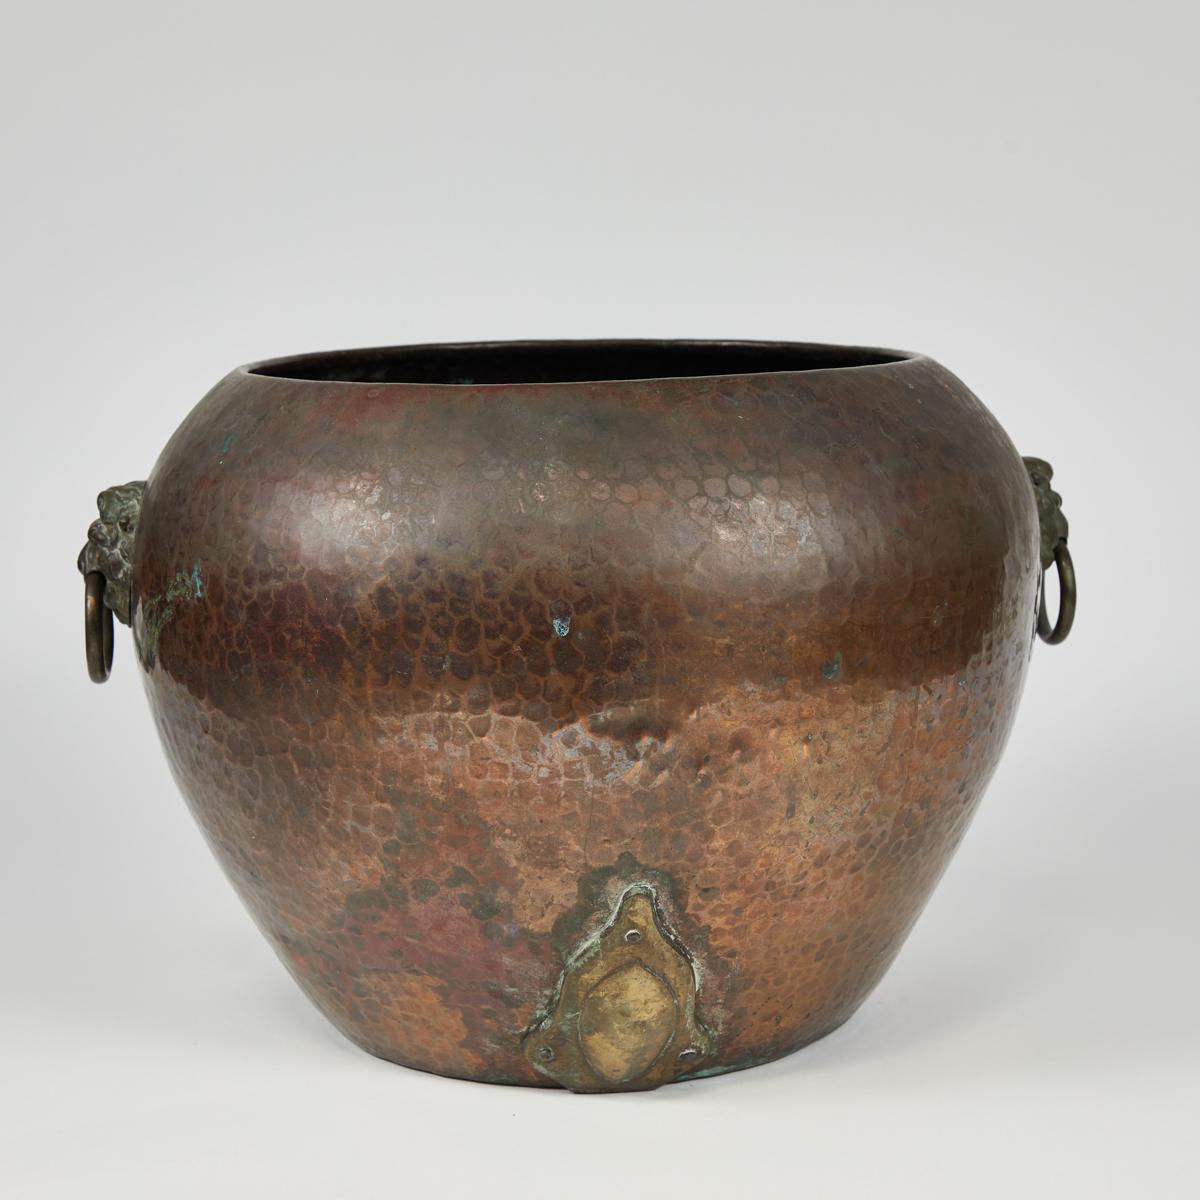 Medium-sized English Arts & Crafts copper hammered bucket or urn. The vessel features two metal lion sculptures, each holding a ring handle in its mouth. Sturdy, and with a wonderful deep patina, it would work well both indoors and outdoors.